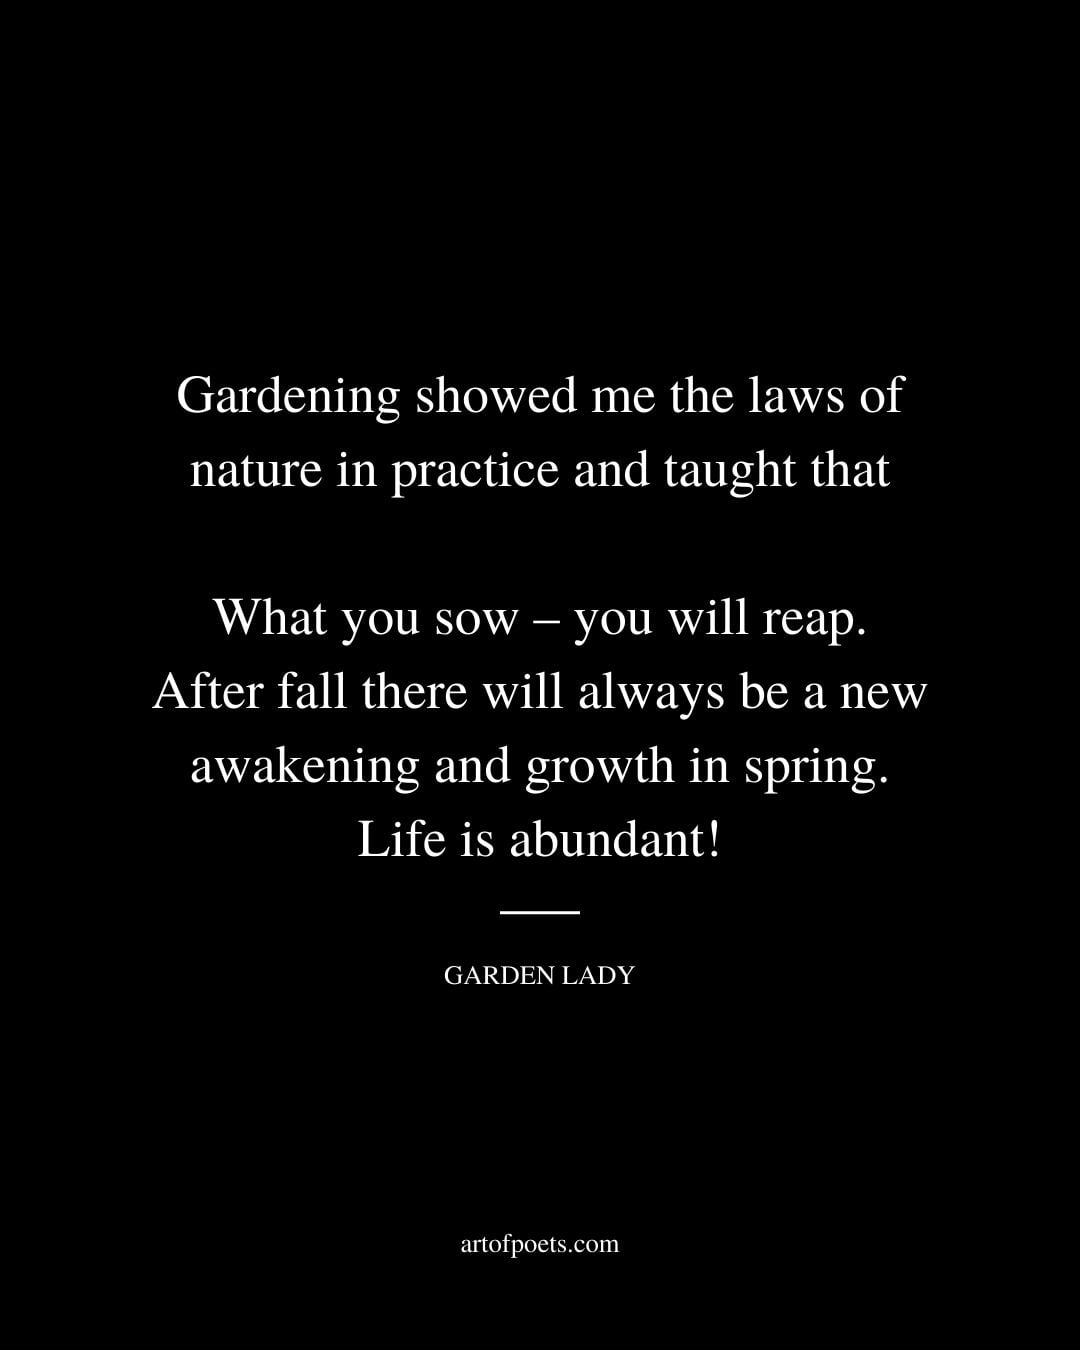 Gardening showed me the laws of nature in practice and taught that 1